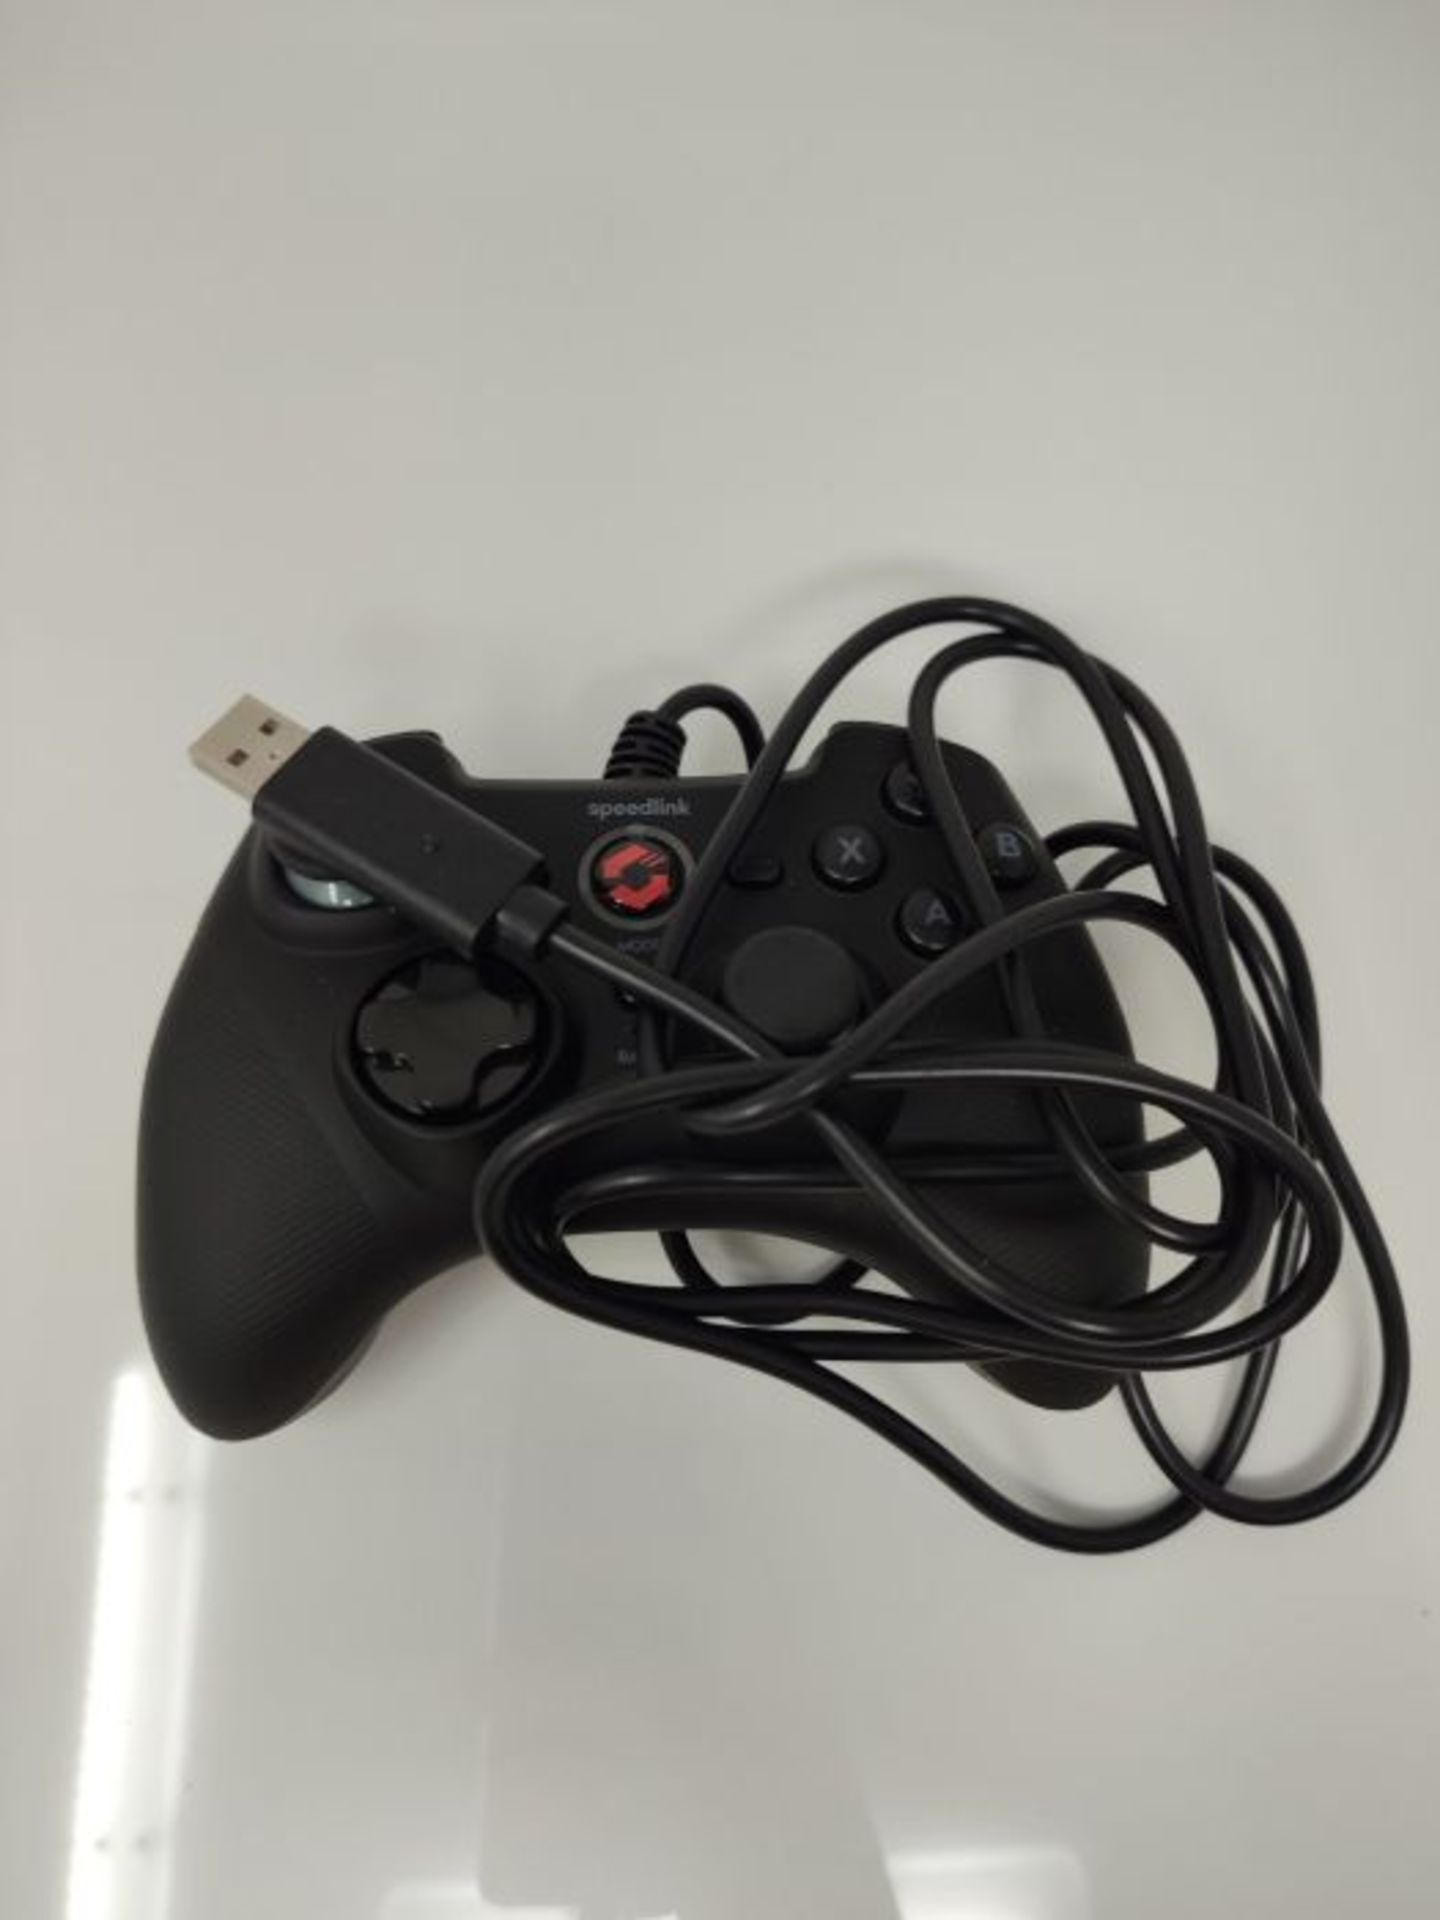 Speedlink RAIT Gamepad - wired gamepad with vibration function, for PC/PS3/Switch, bla - Image 2 of 2